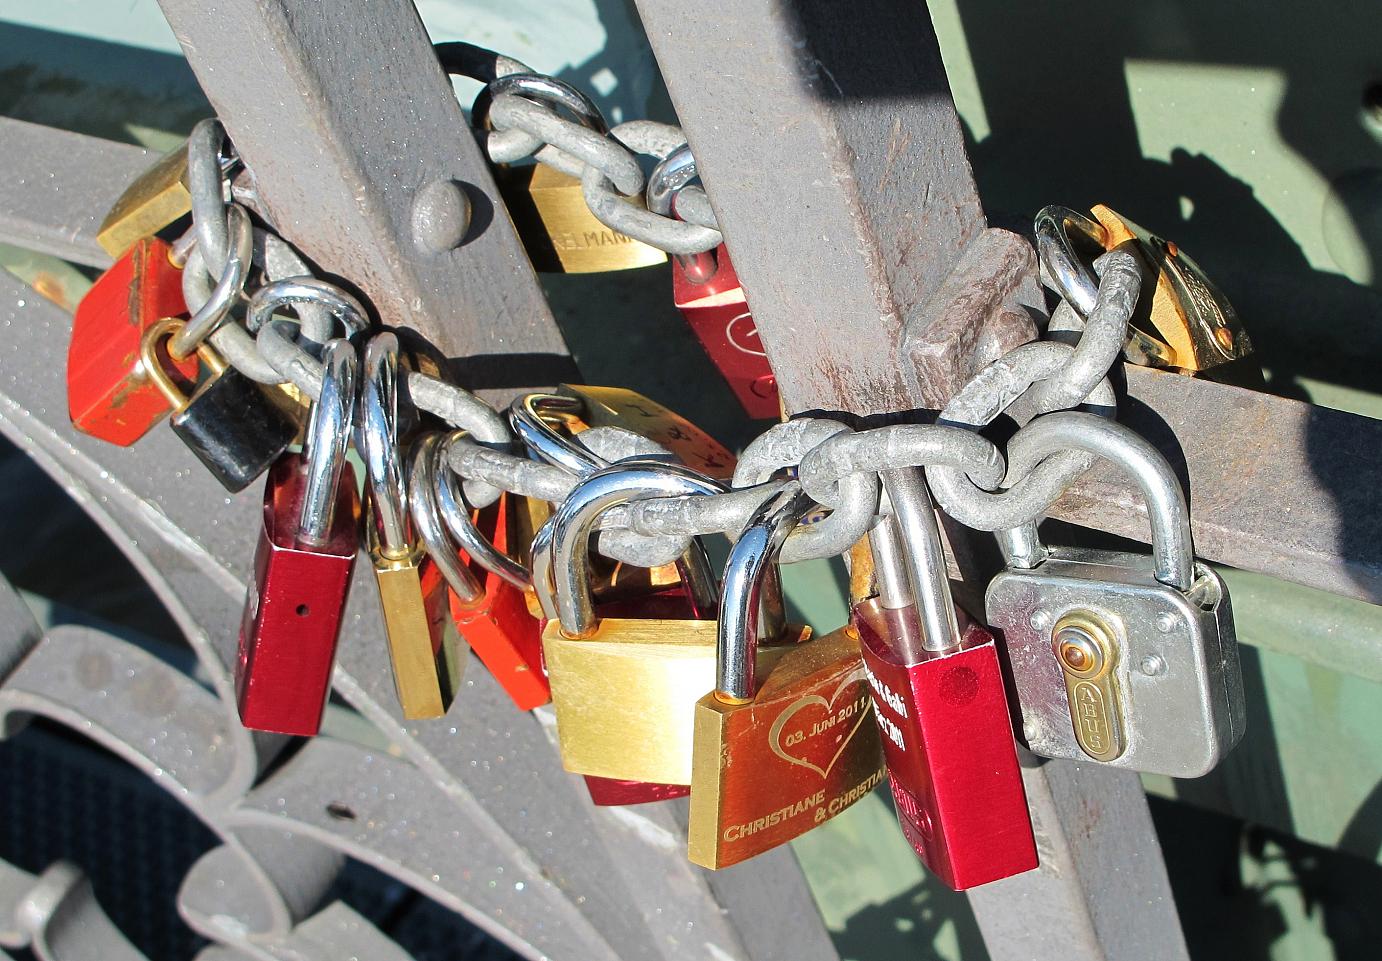 Love locks for eternity (holding an old bridge together...)